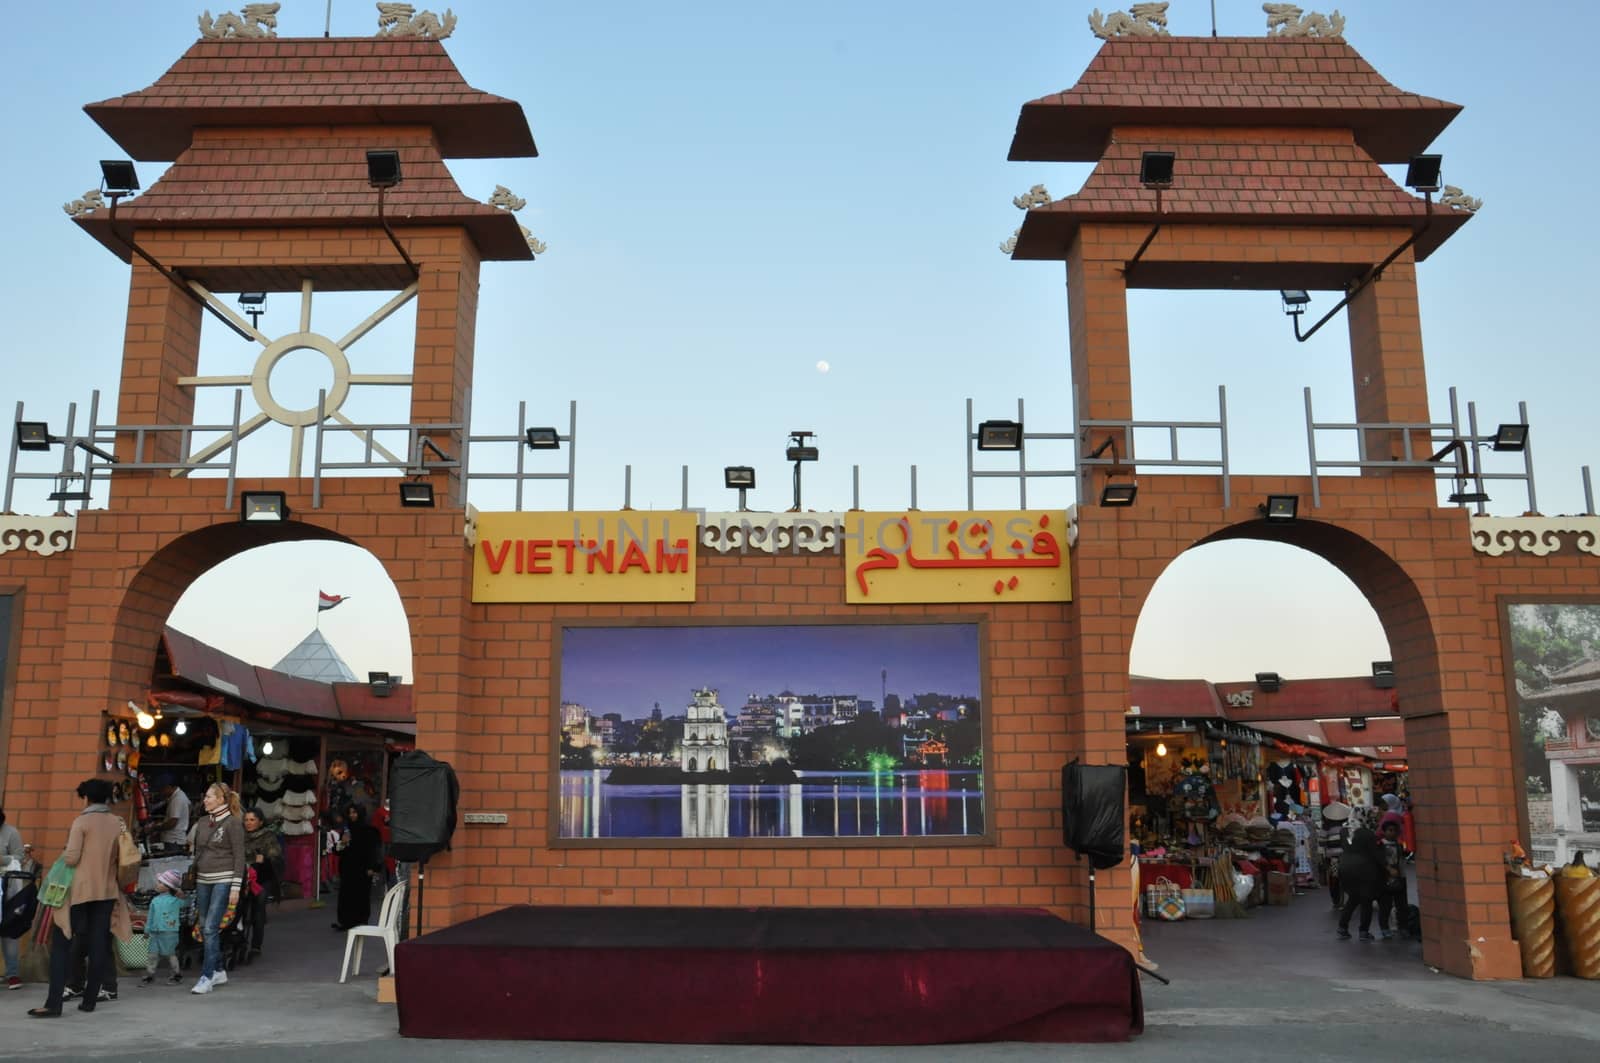 Vietnam pavilion at Global Village in Dubai, UAE. It is claimed to be the world's largest tourism, leisure and entertainment project.